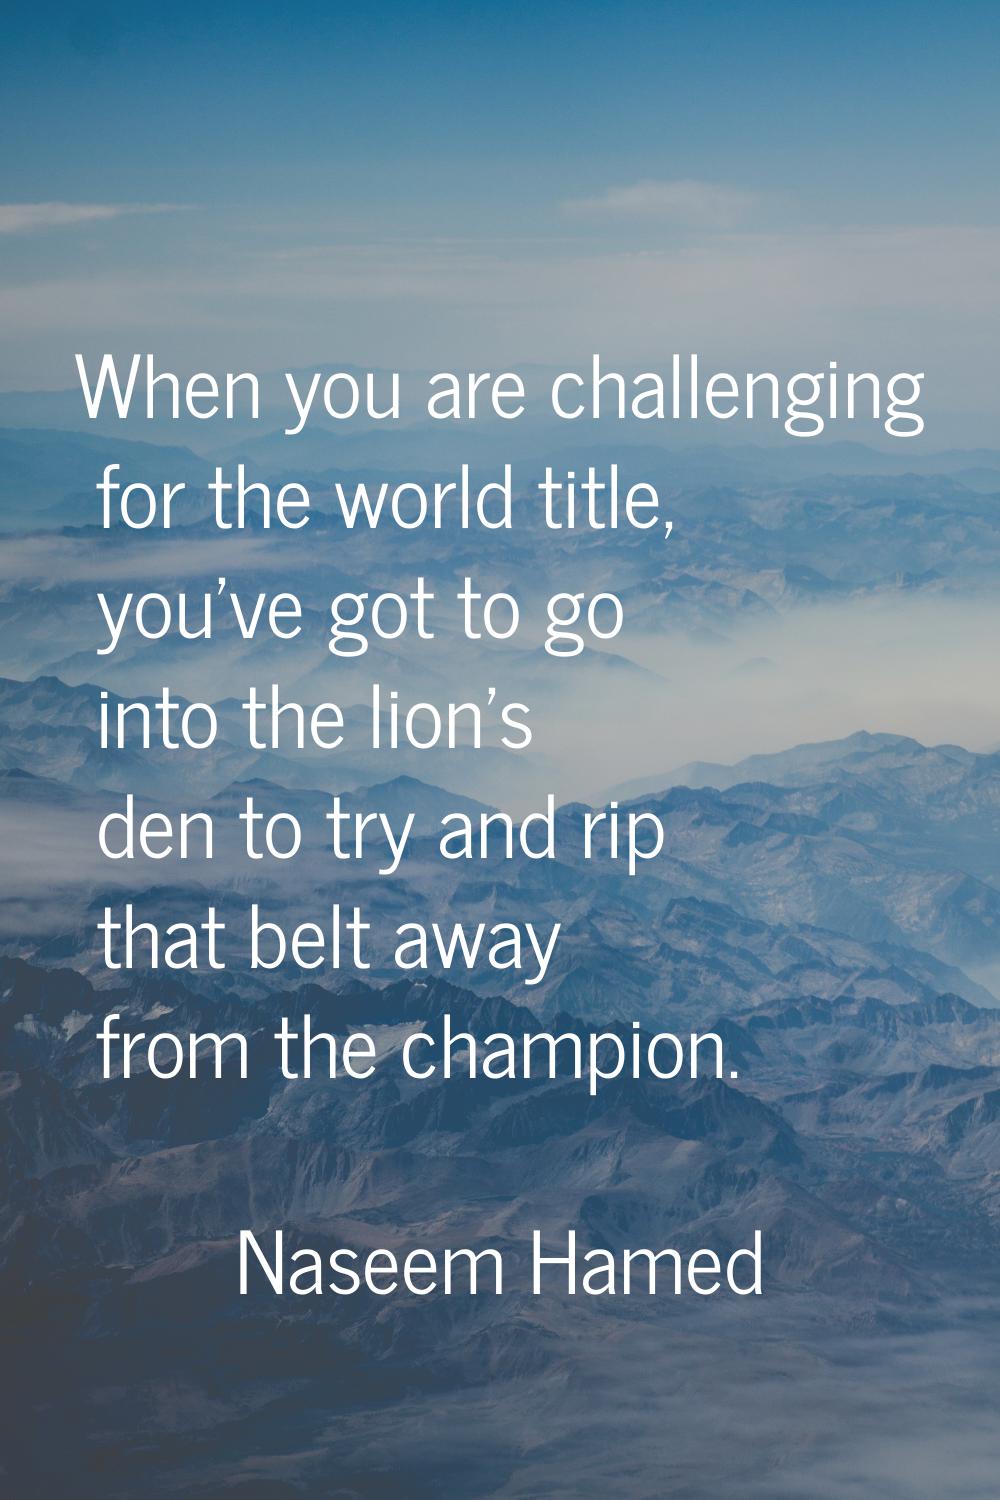 When you are challenging for the world title, you've got to go into the lion's den to try and rip t